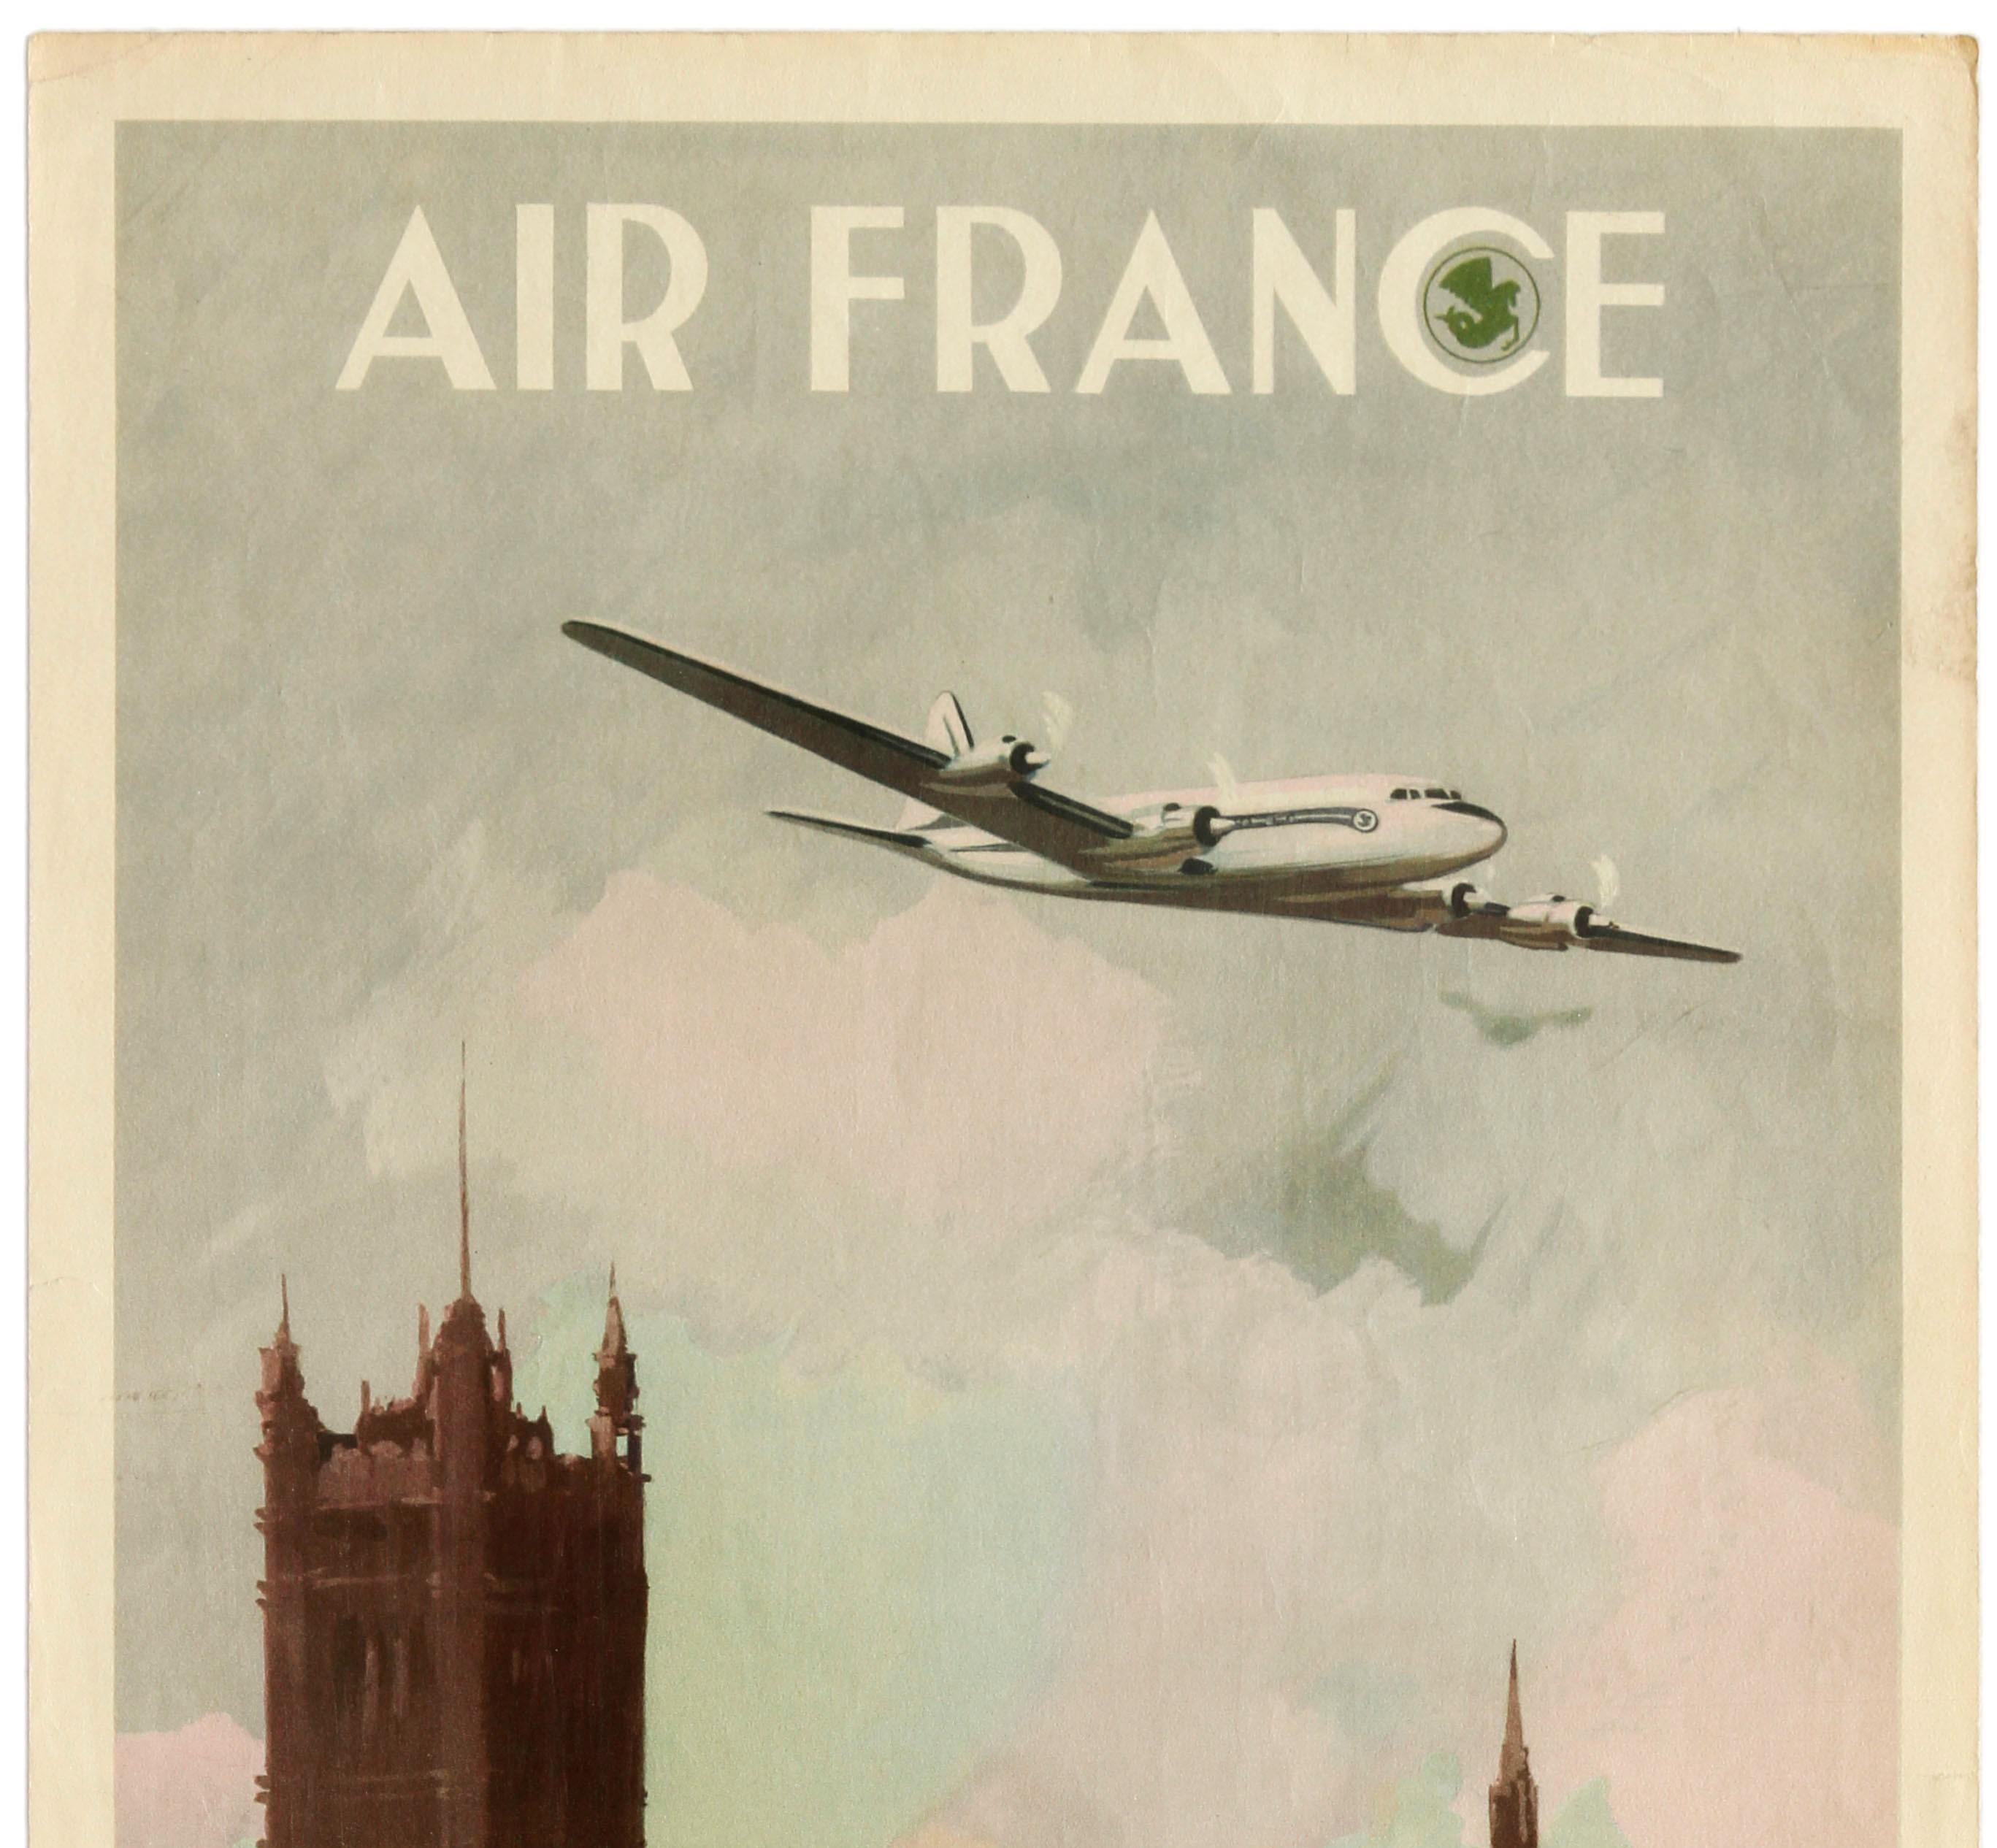 Original vintage Air France poster promoting its flights to Angleterre / England featuring a great painting depicting an Air France propeller plane flying over the city of London and the River Thames busy with ferry and sailing boats on the water in